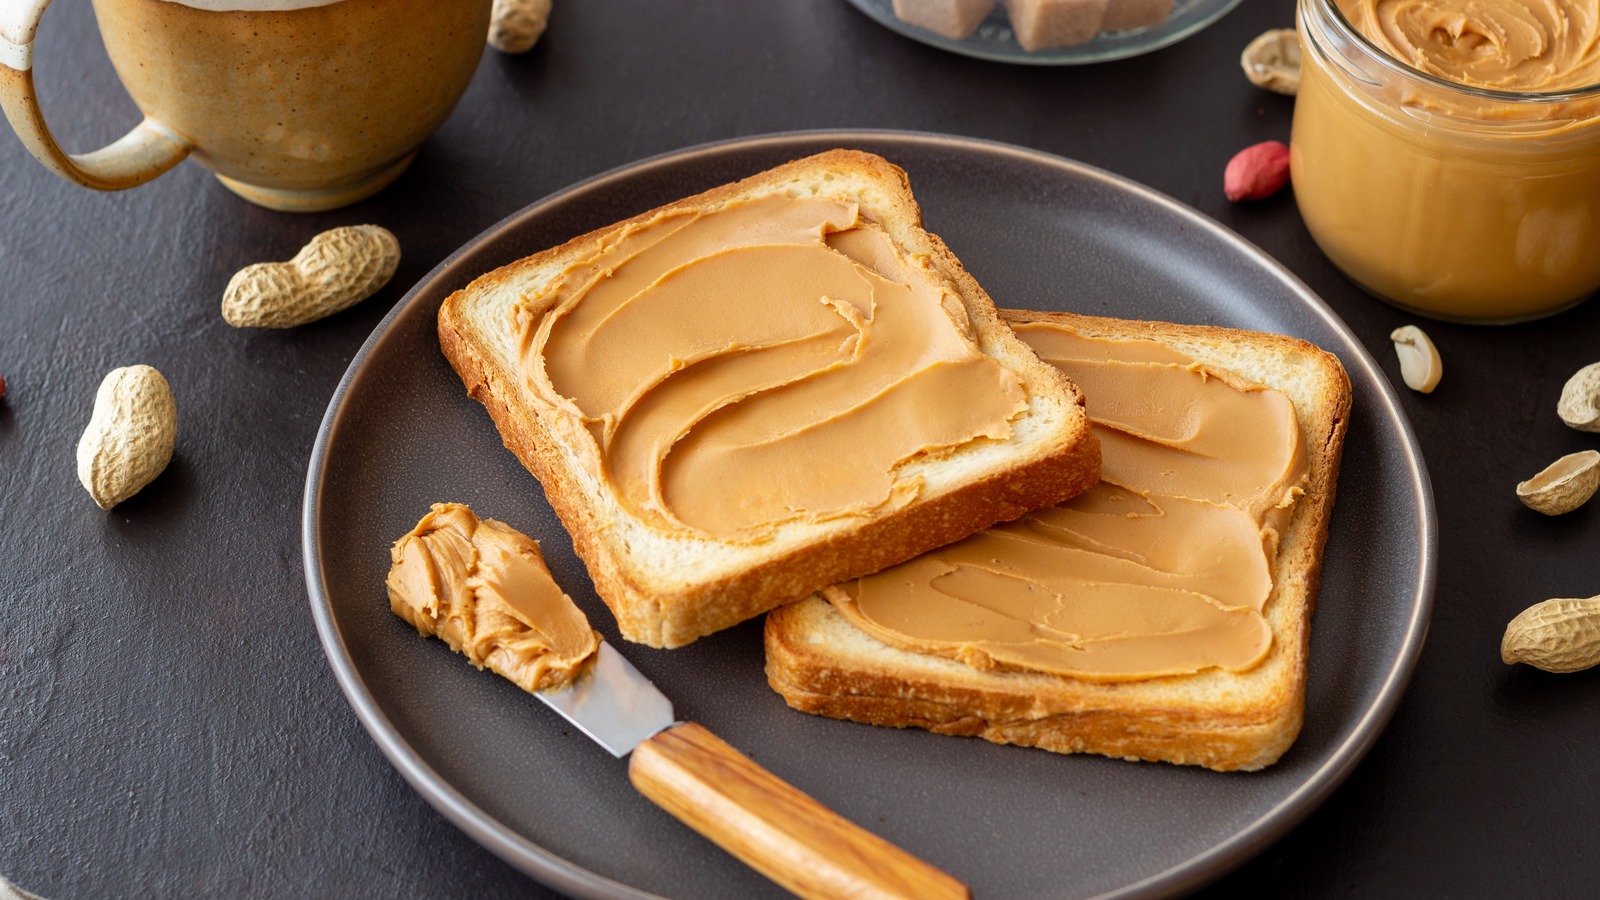 Peanut butter and jelly is as classic a pairing as you can find, but if you...